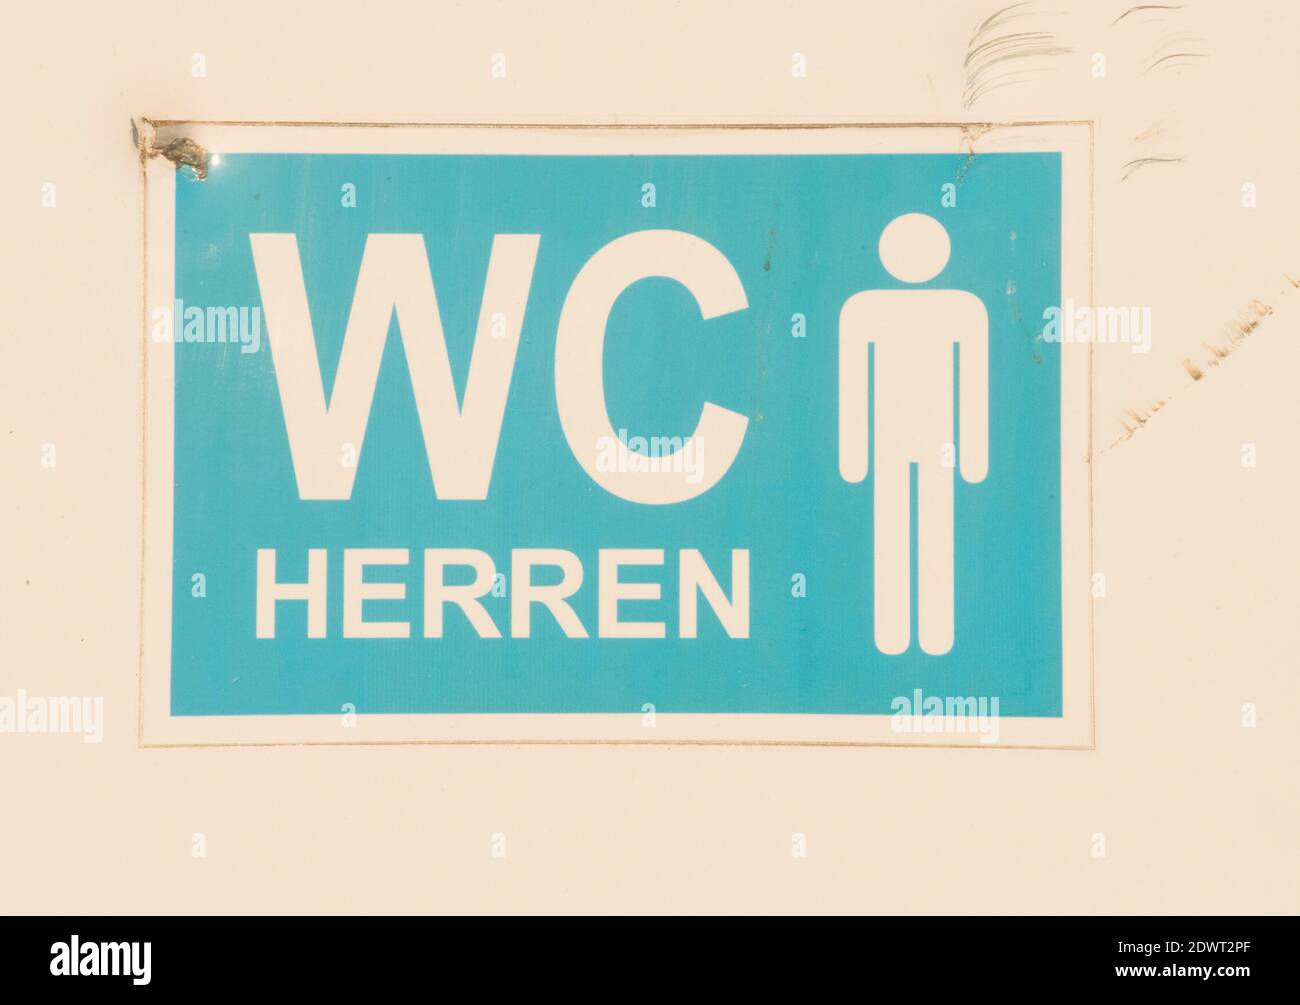 a toilet or WC sign for a public restroom, body hygiene and basic needs Stock Photo